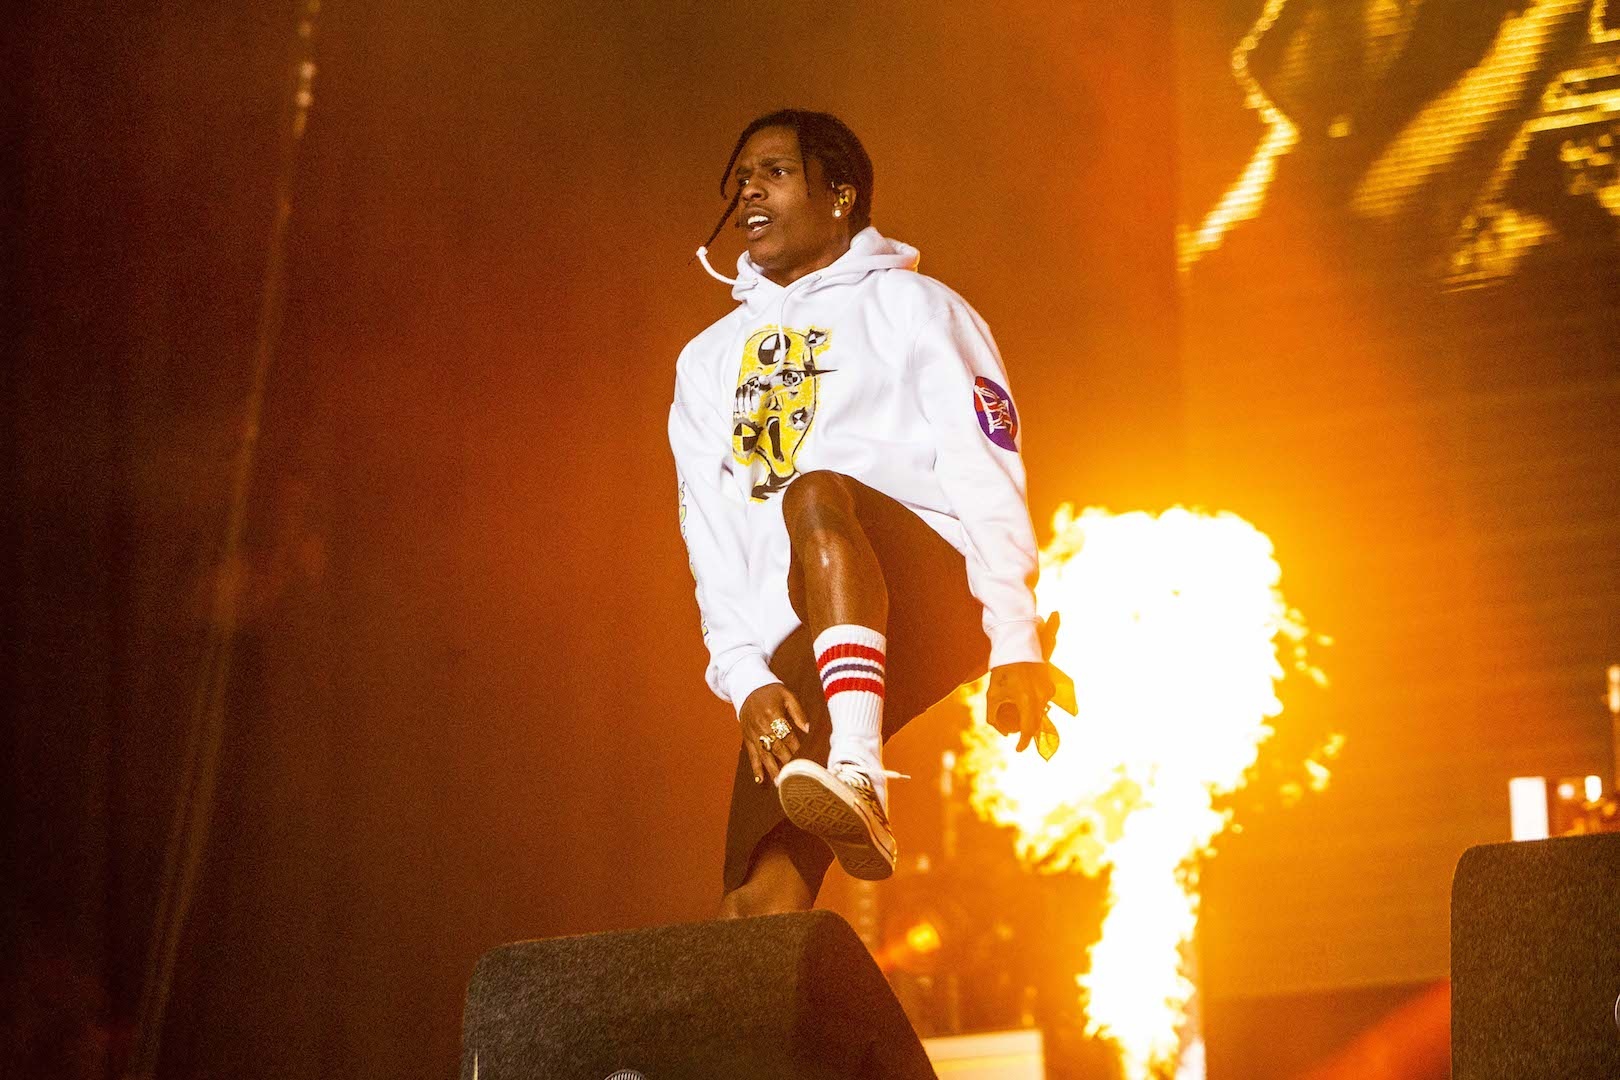 Trump allies say rapper A $AP Rocky stopped returning messages after releas...